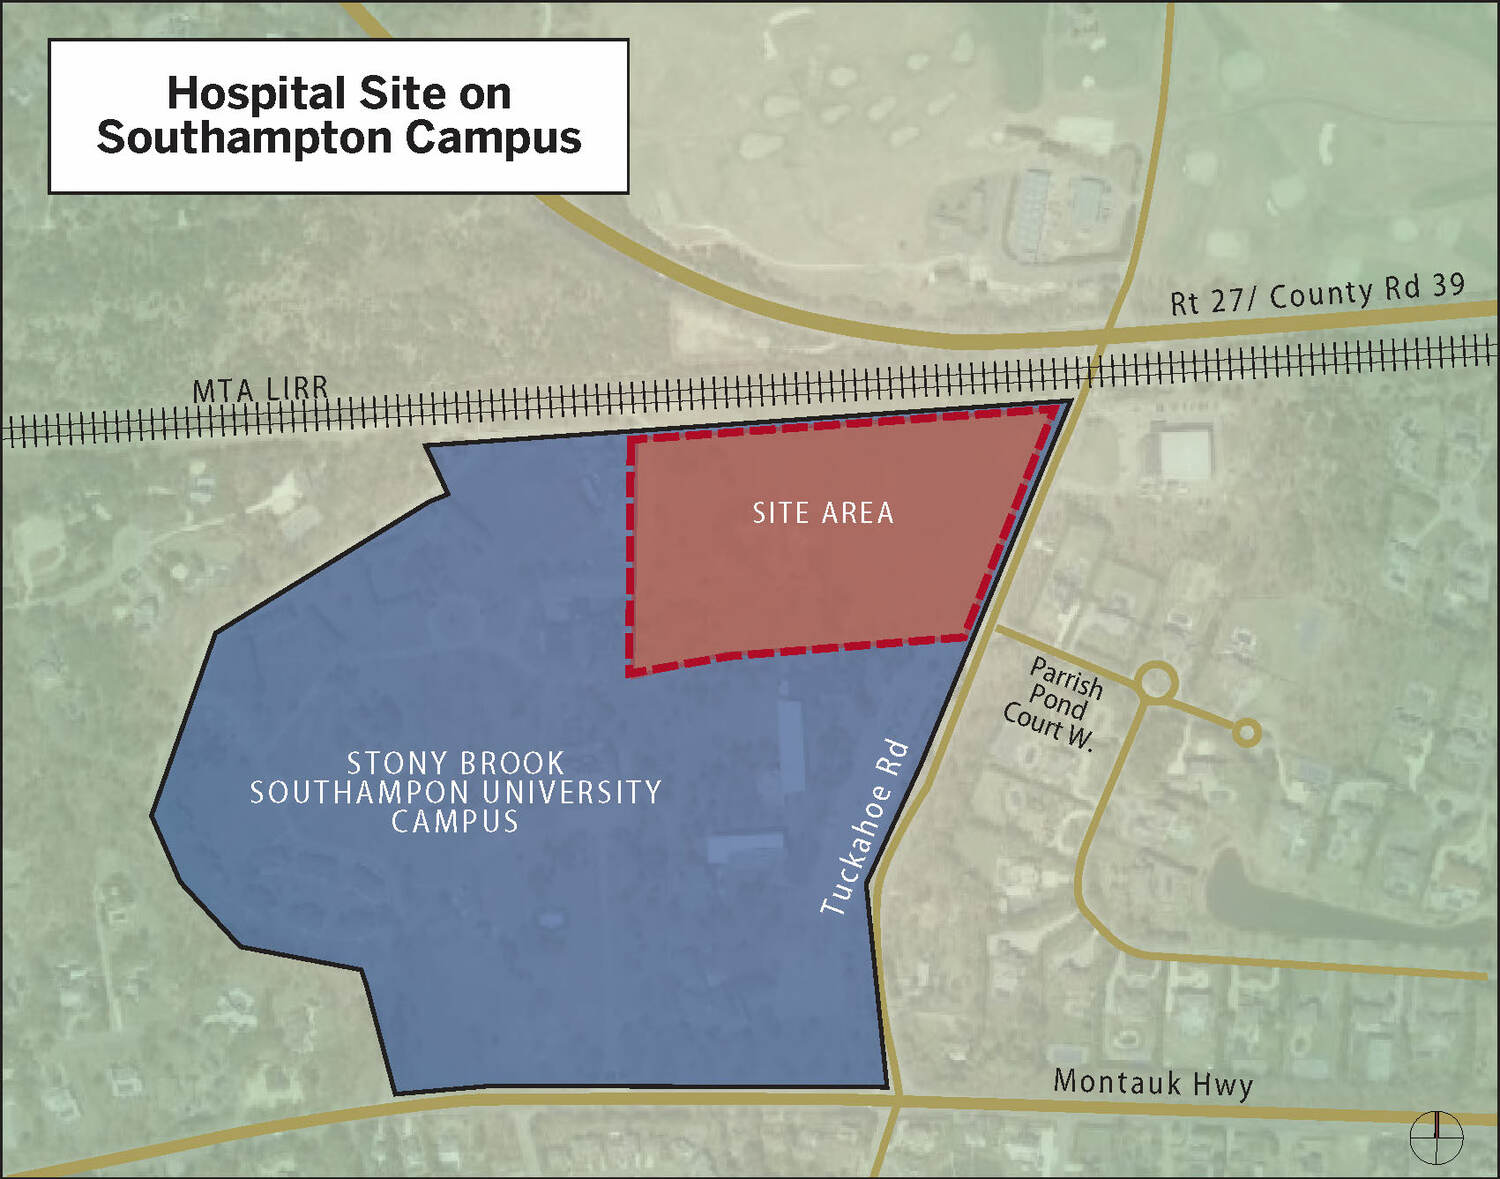 The new Stony Brook Southampton Hospital will be built on 15 acres at the northeastern end of the campus, where the baseball and soccer fields are now. The site is adjacent to where the LIRR station used to stand, and may again someday.